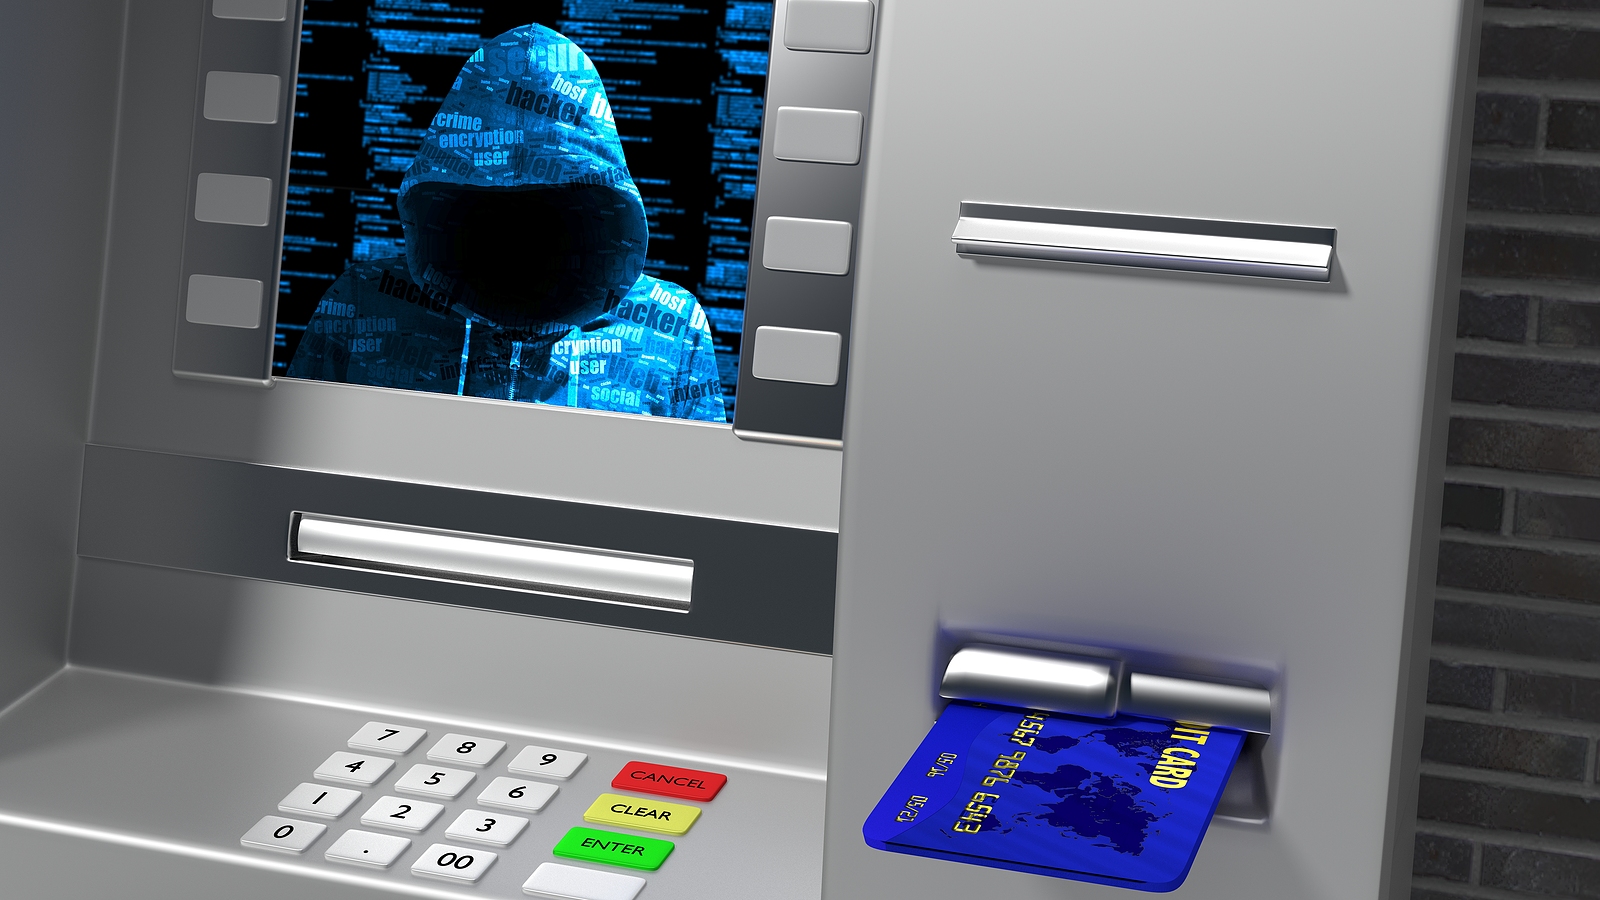 Iagona ScrutisWeb Vulnerabilities Could Expose ATMs to Remote Hacking – Source: www.securityweek.com